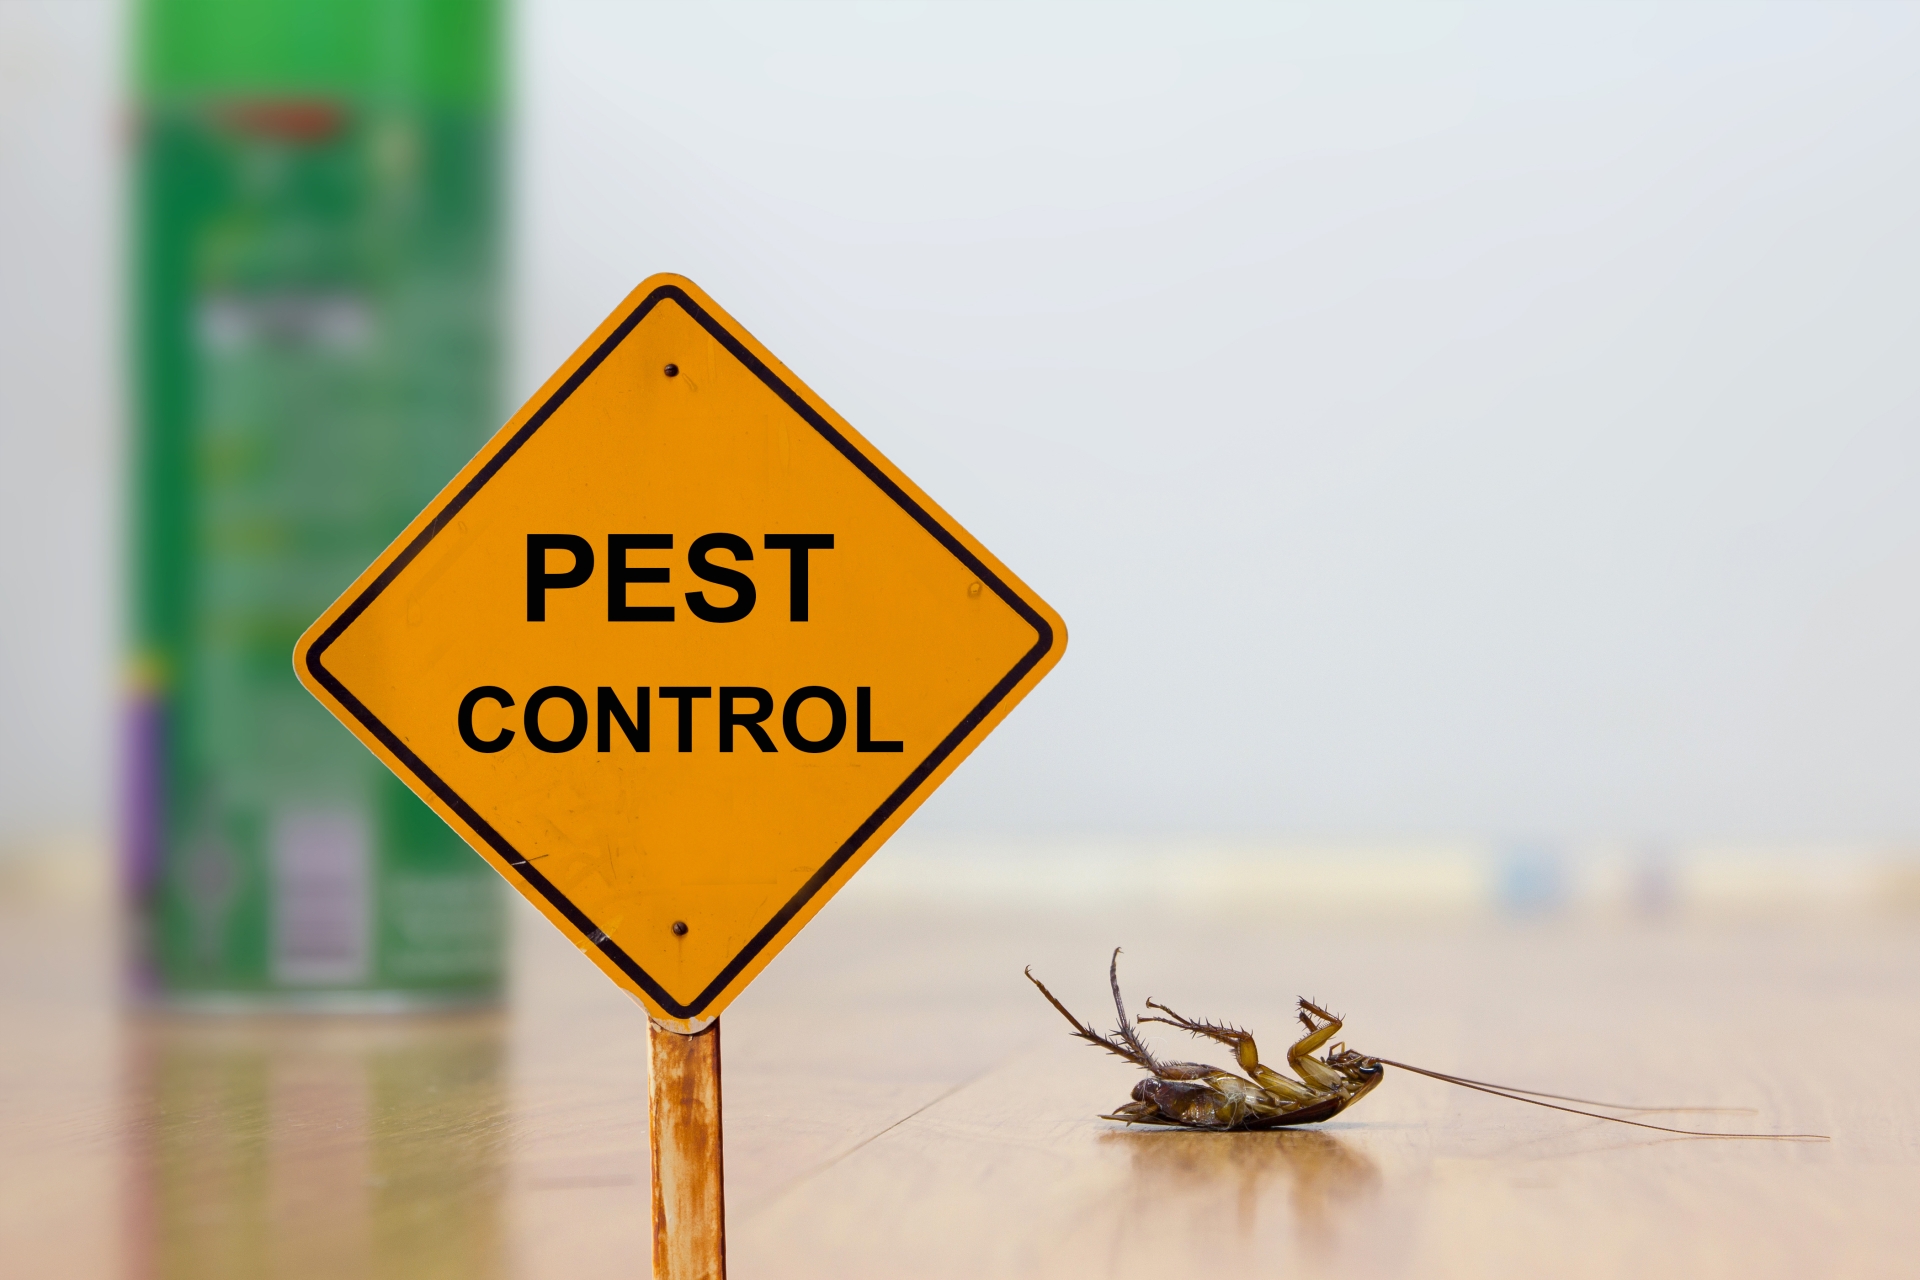 24 Hour Pest Control, Pest Control in Kingston upon Thames, KT1. Call Now 020 8166 9746